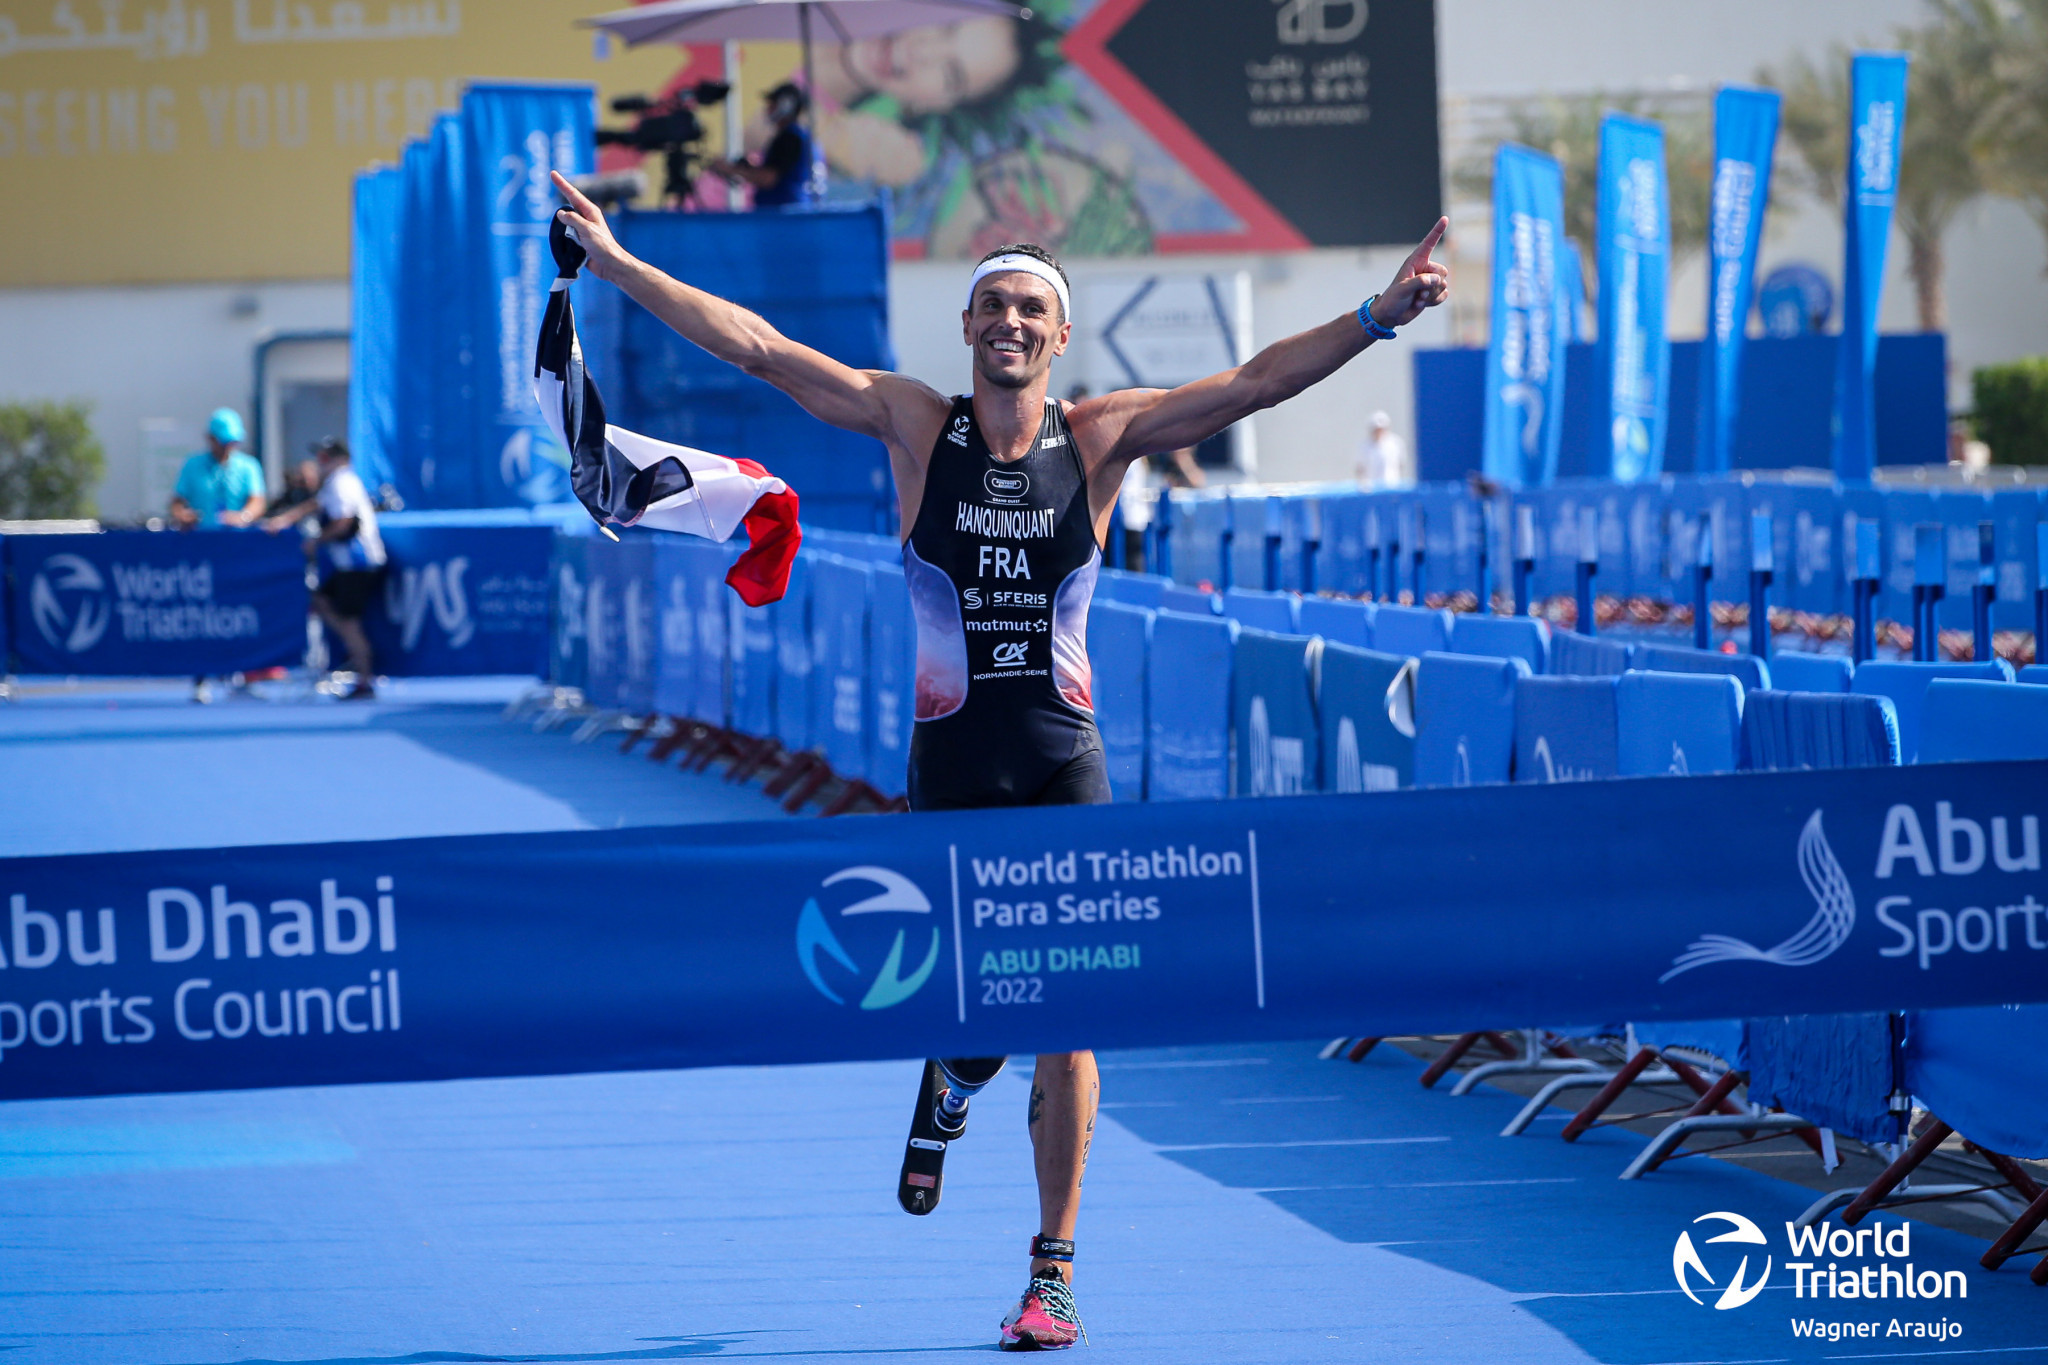 France's Alexis Hanquinquant continued his remarkable winning streak in the men's PTS4 class dating back to September 2019 ©World Triathlon